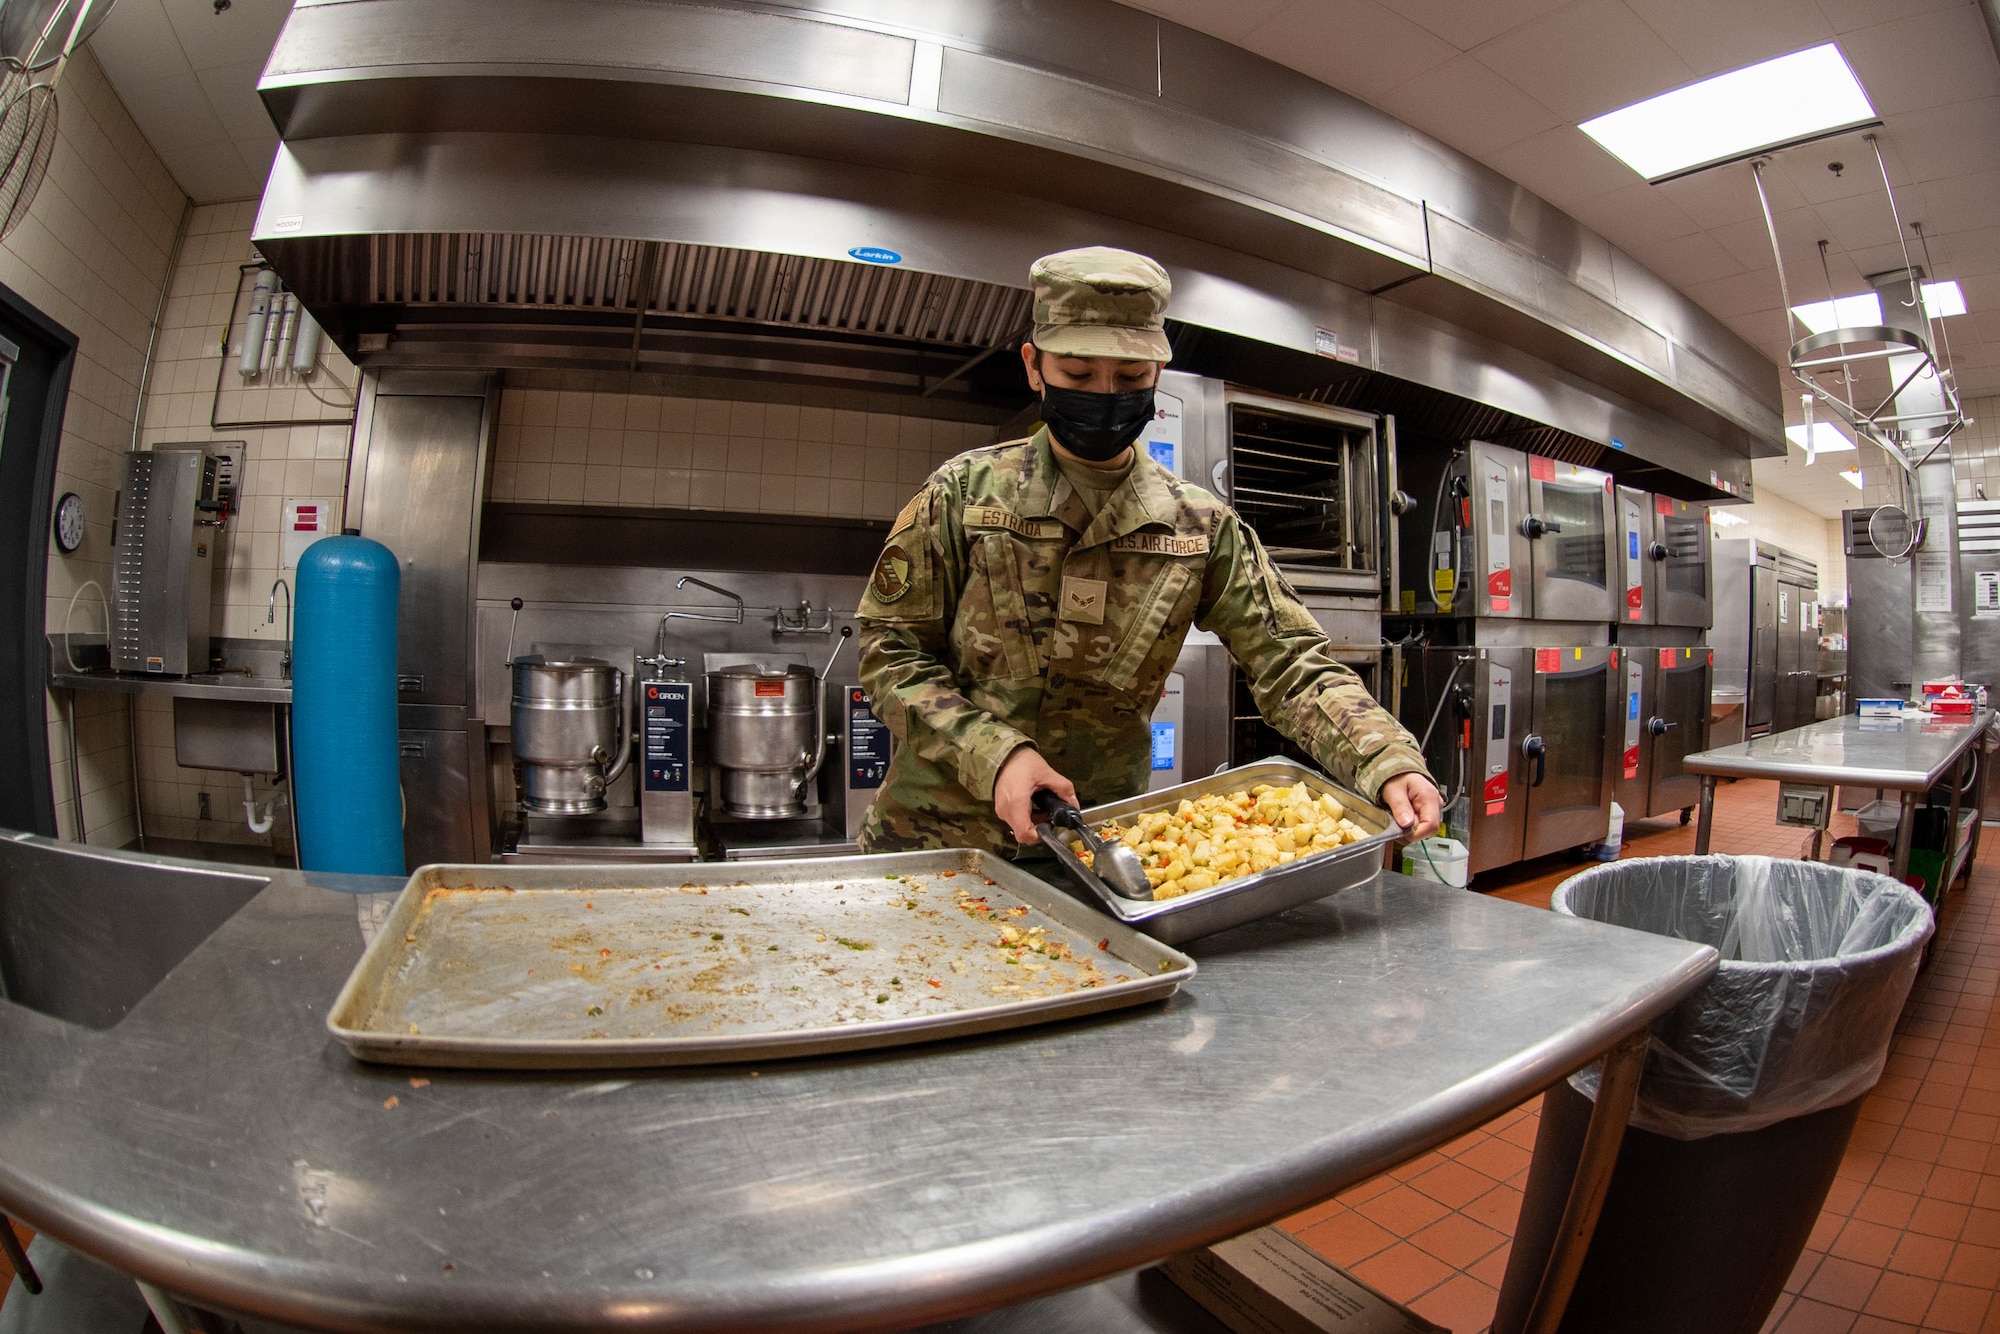 Airman in kitchen scooping potatoes.